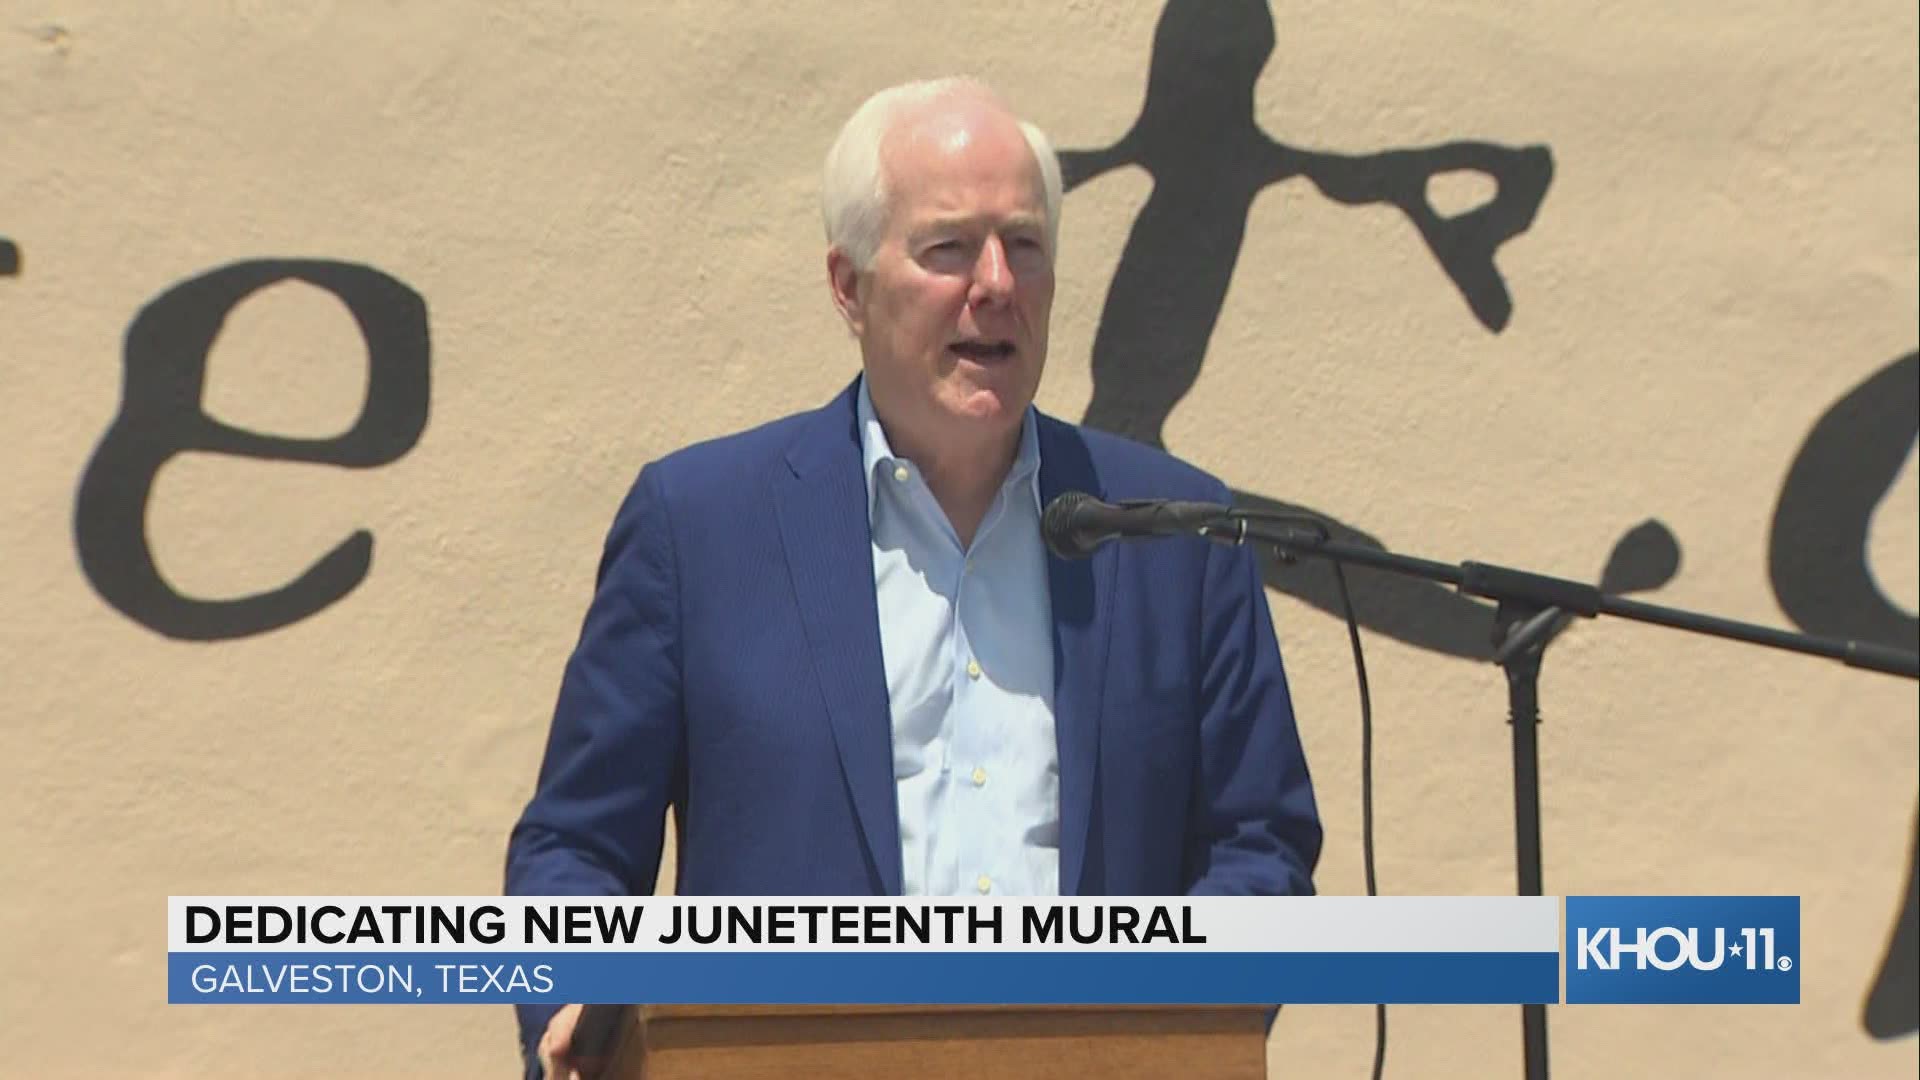 Sen. John Cornyn joined the Juneteenth Legacy Project’s dedication of the “Absolute Equality” mural Saturday in Galveston.